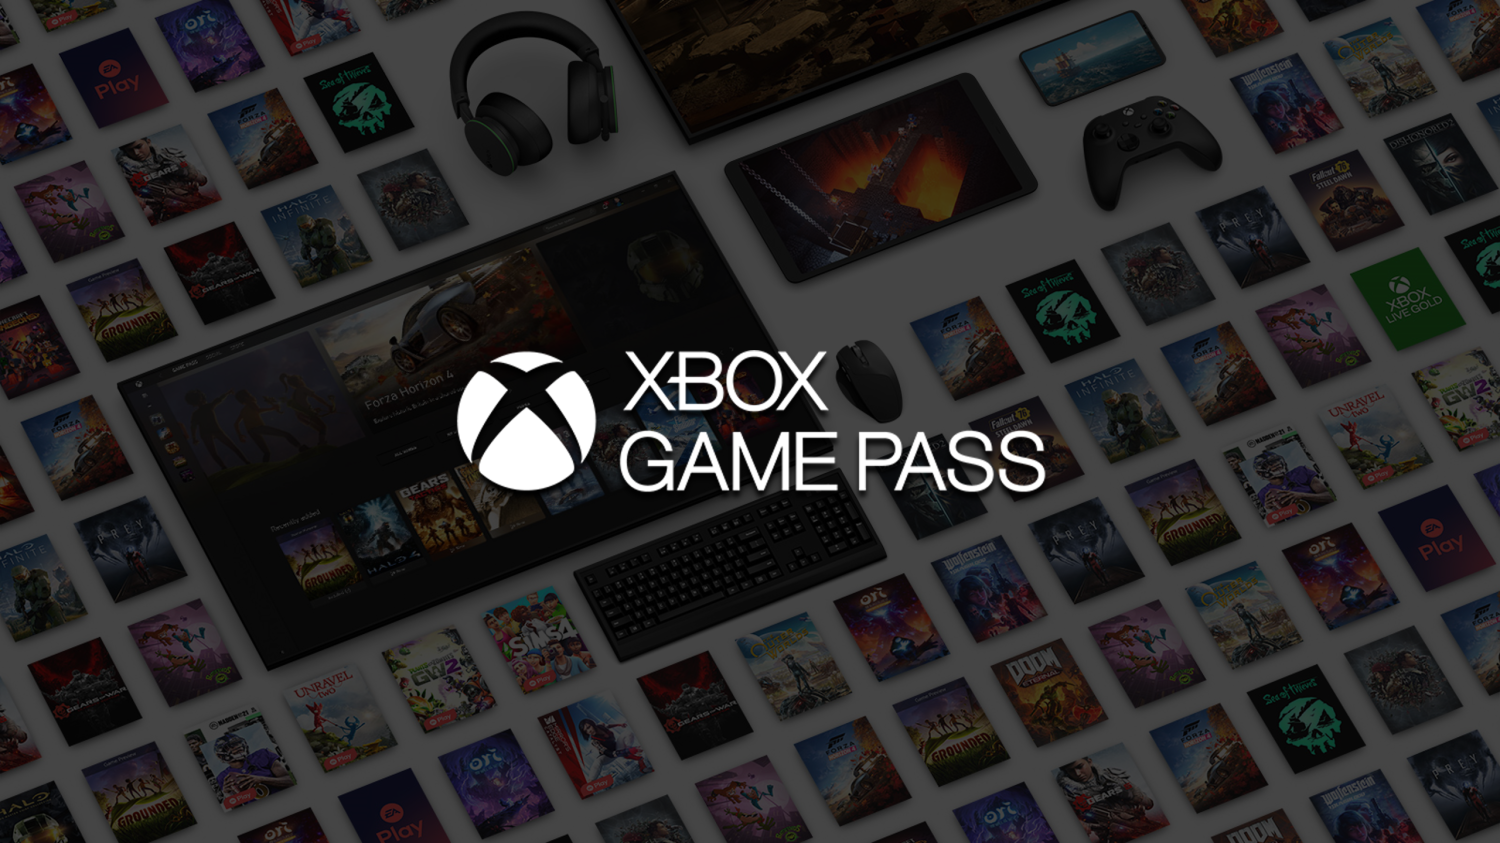 Opinion: Xbox Game Pass is indeed disruptive, and that's not a bad thing